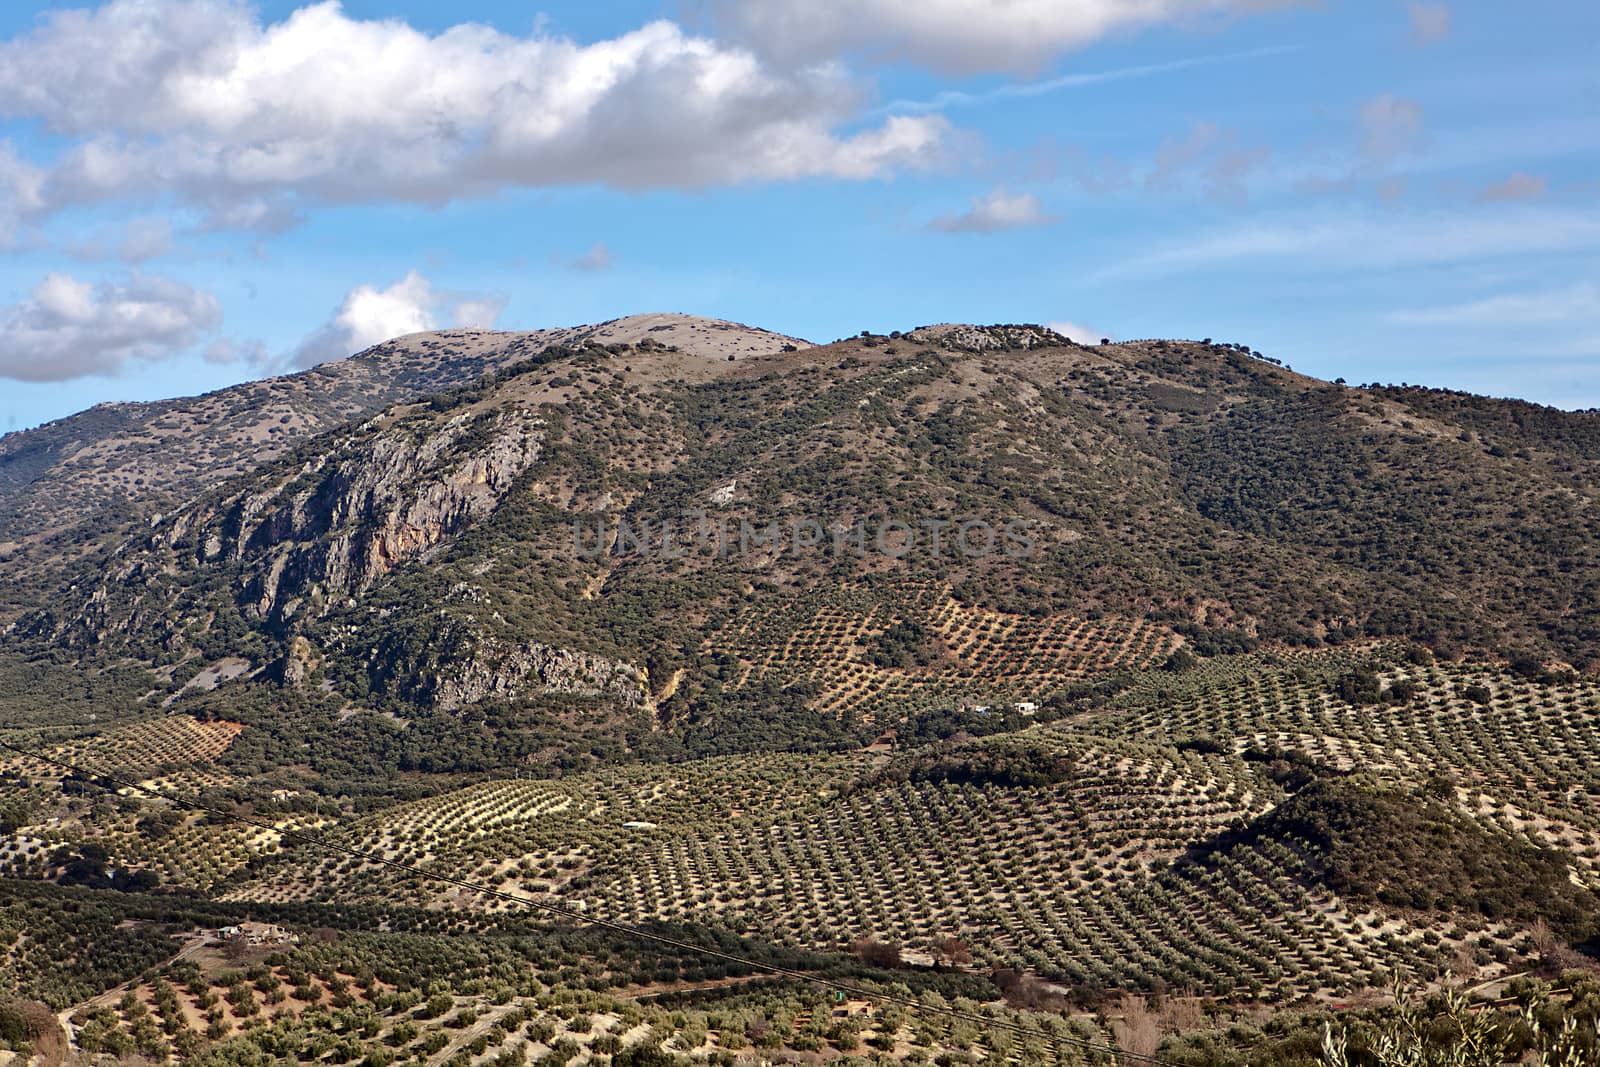 Ecological cultivation of olive trees in the province of Jaen, Spain